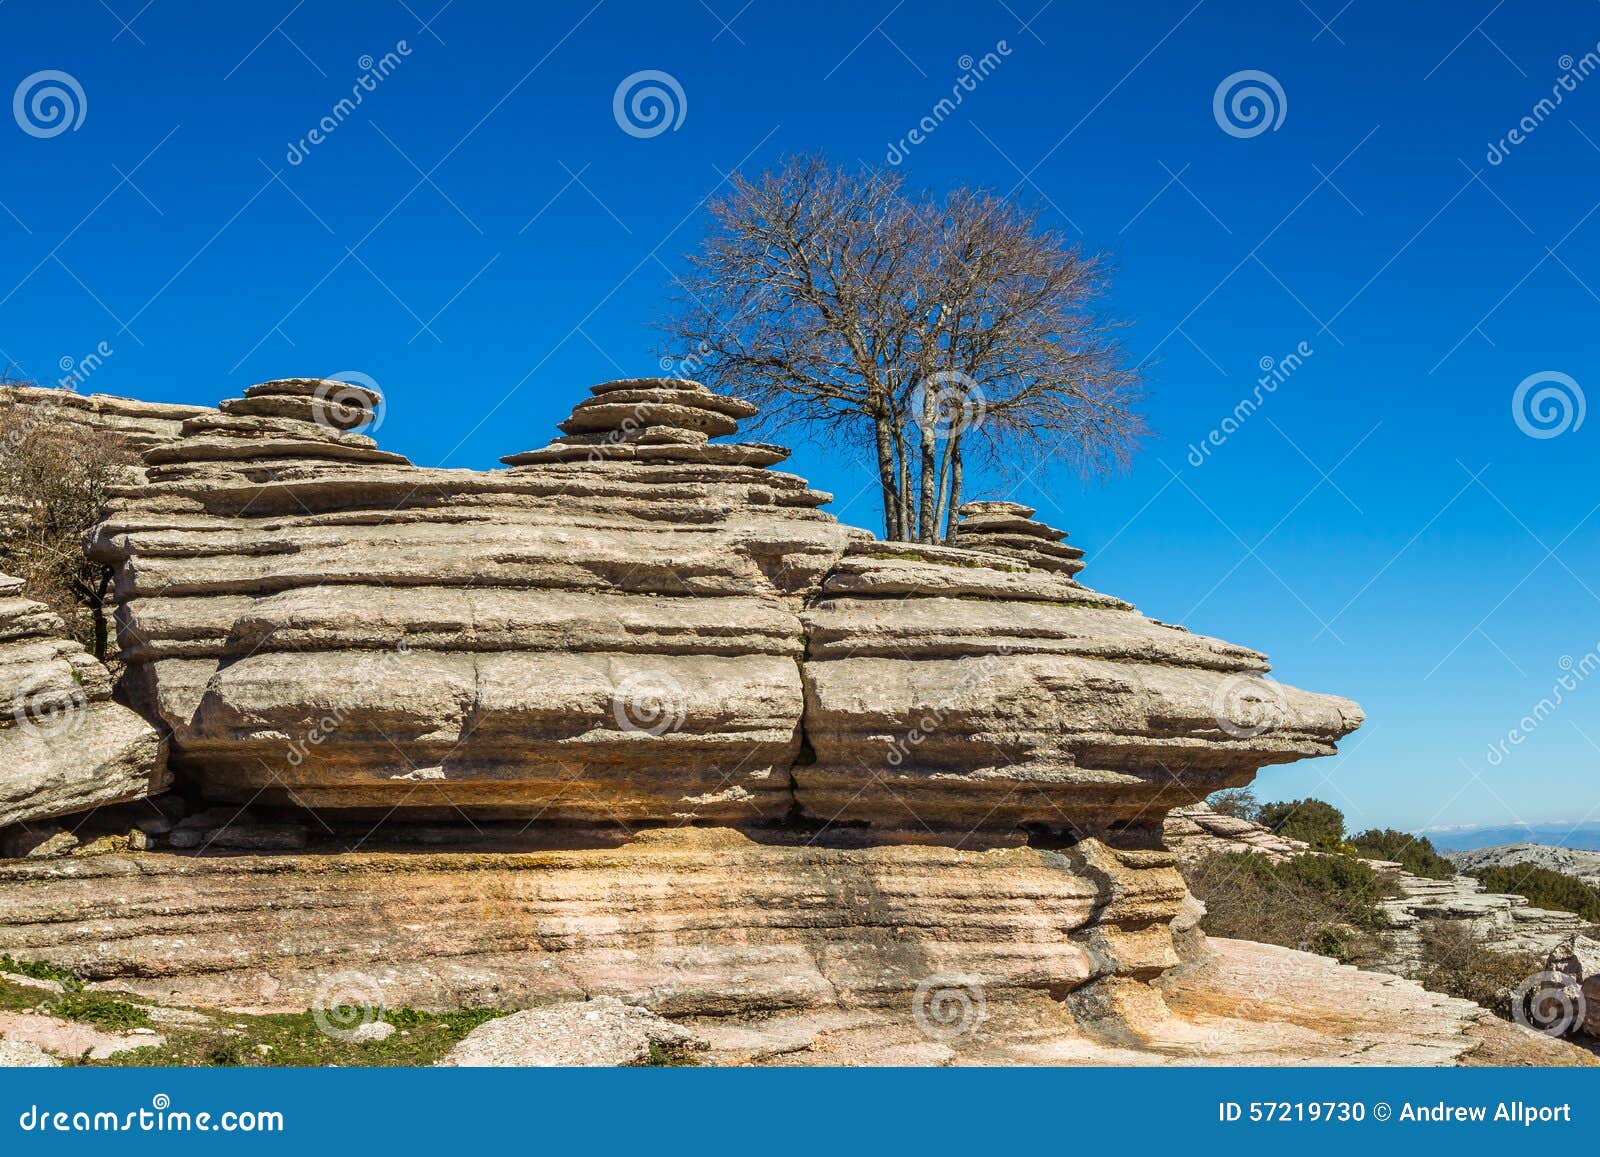 rock formations of torcal de antequera